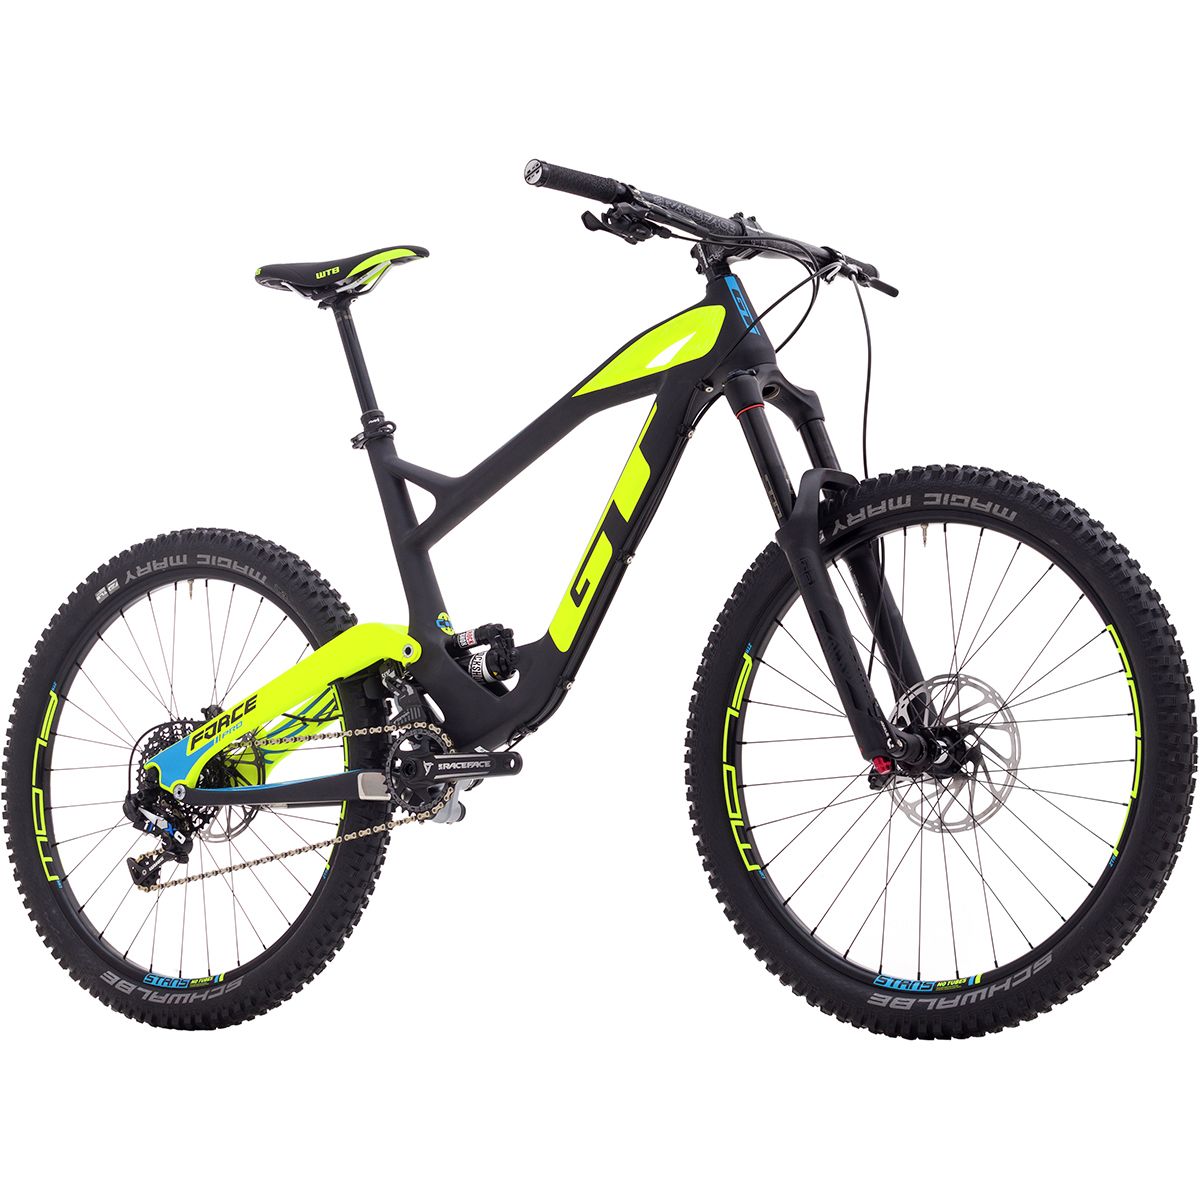 GT Force Carbon Pro Complete Mountain Bike 2017